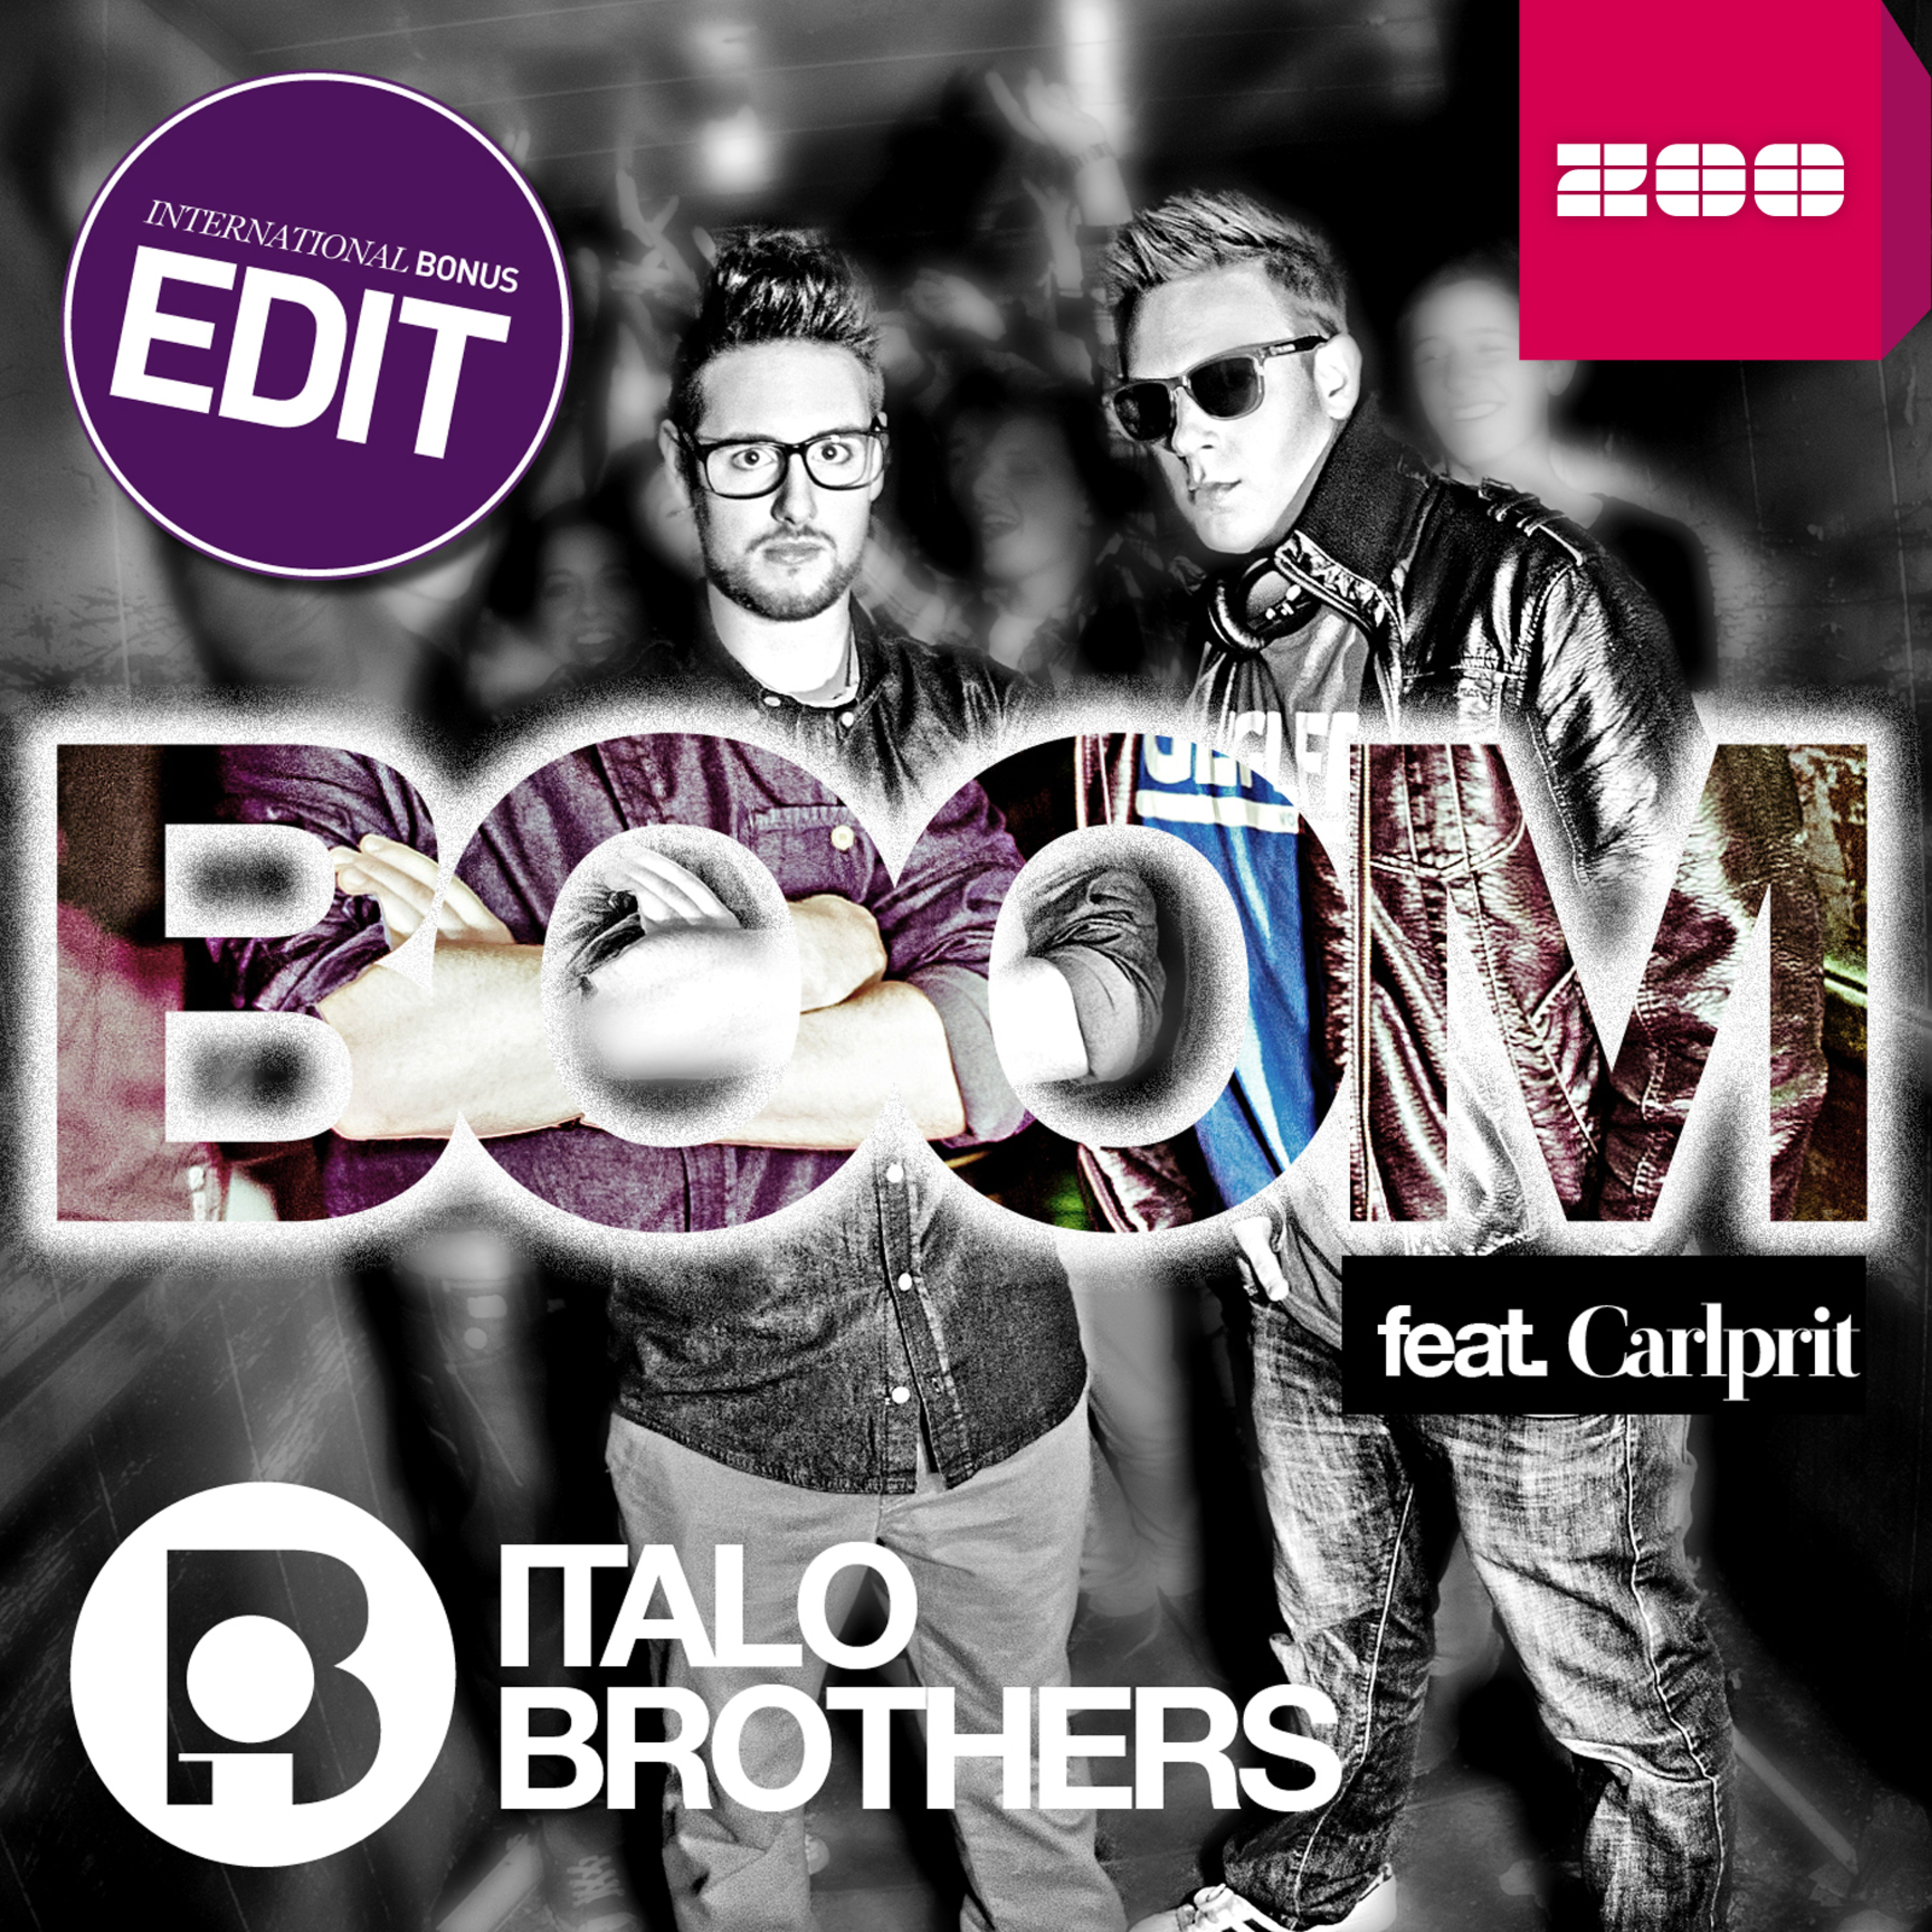 Boom (Spanish Bonus Extended Mix by Andy Lopez)